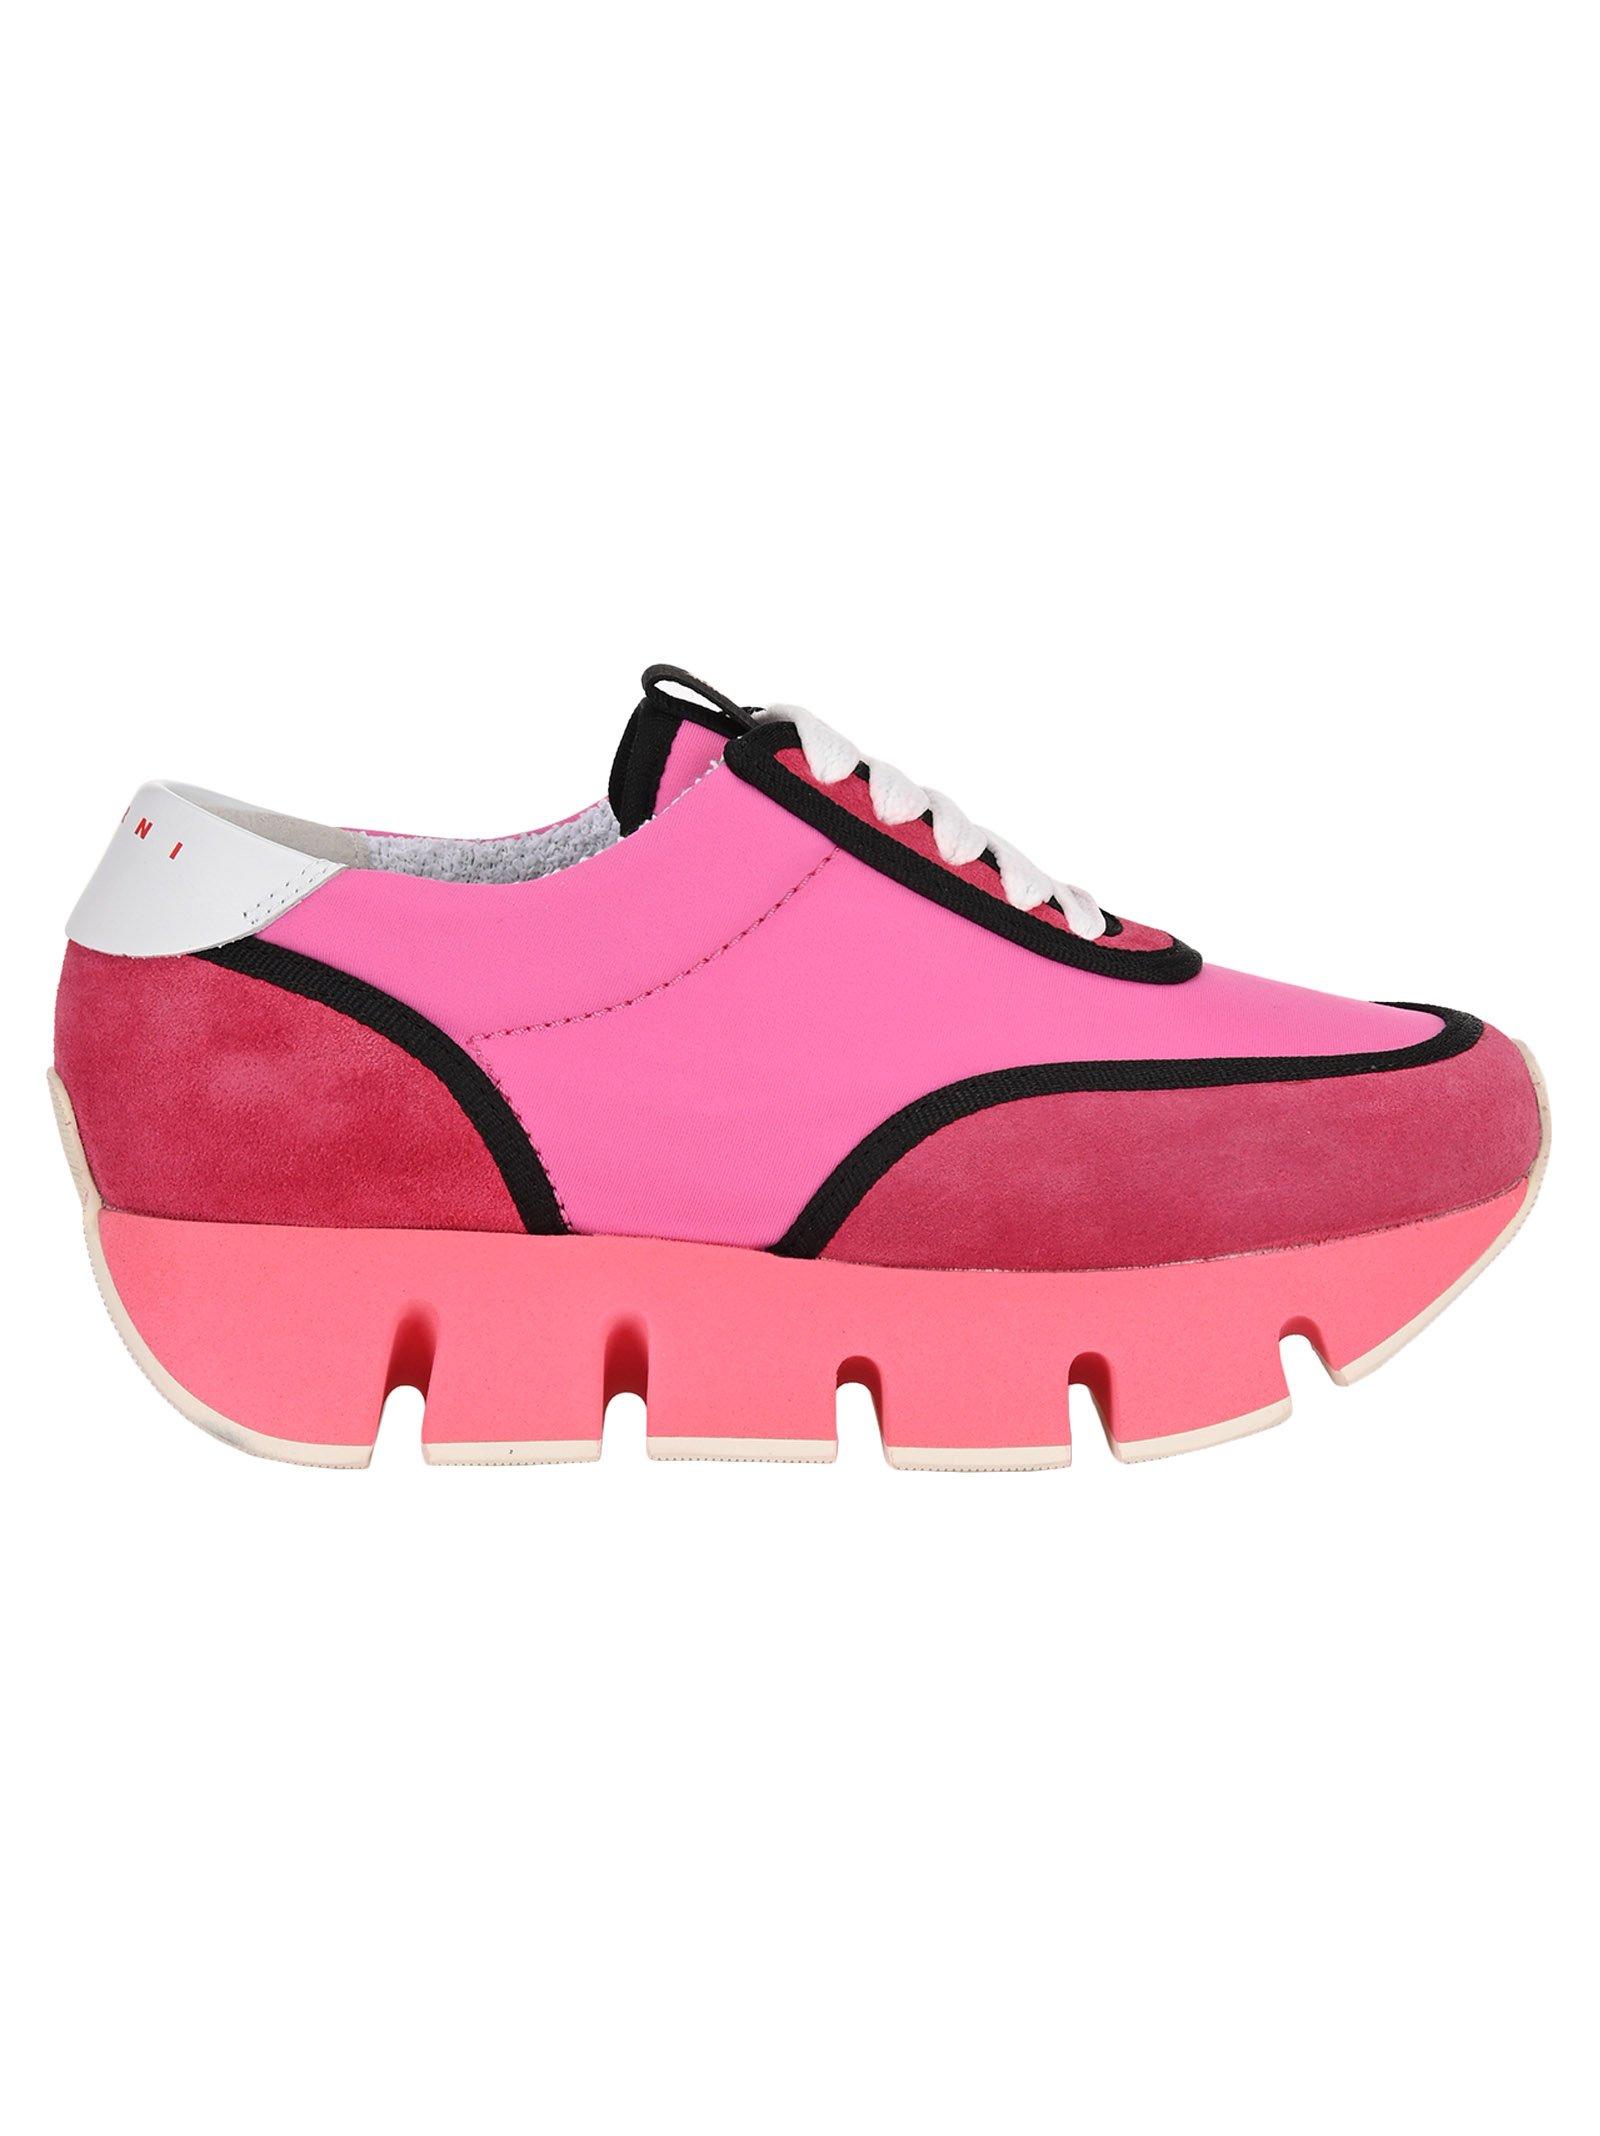 Marni Rubber Colour Block Platform Sneakers in Pink - Lyst